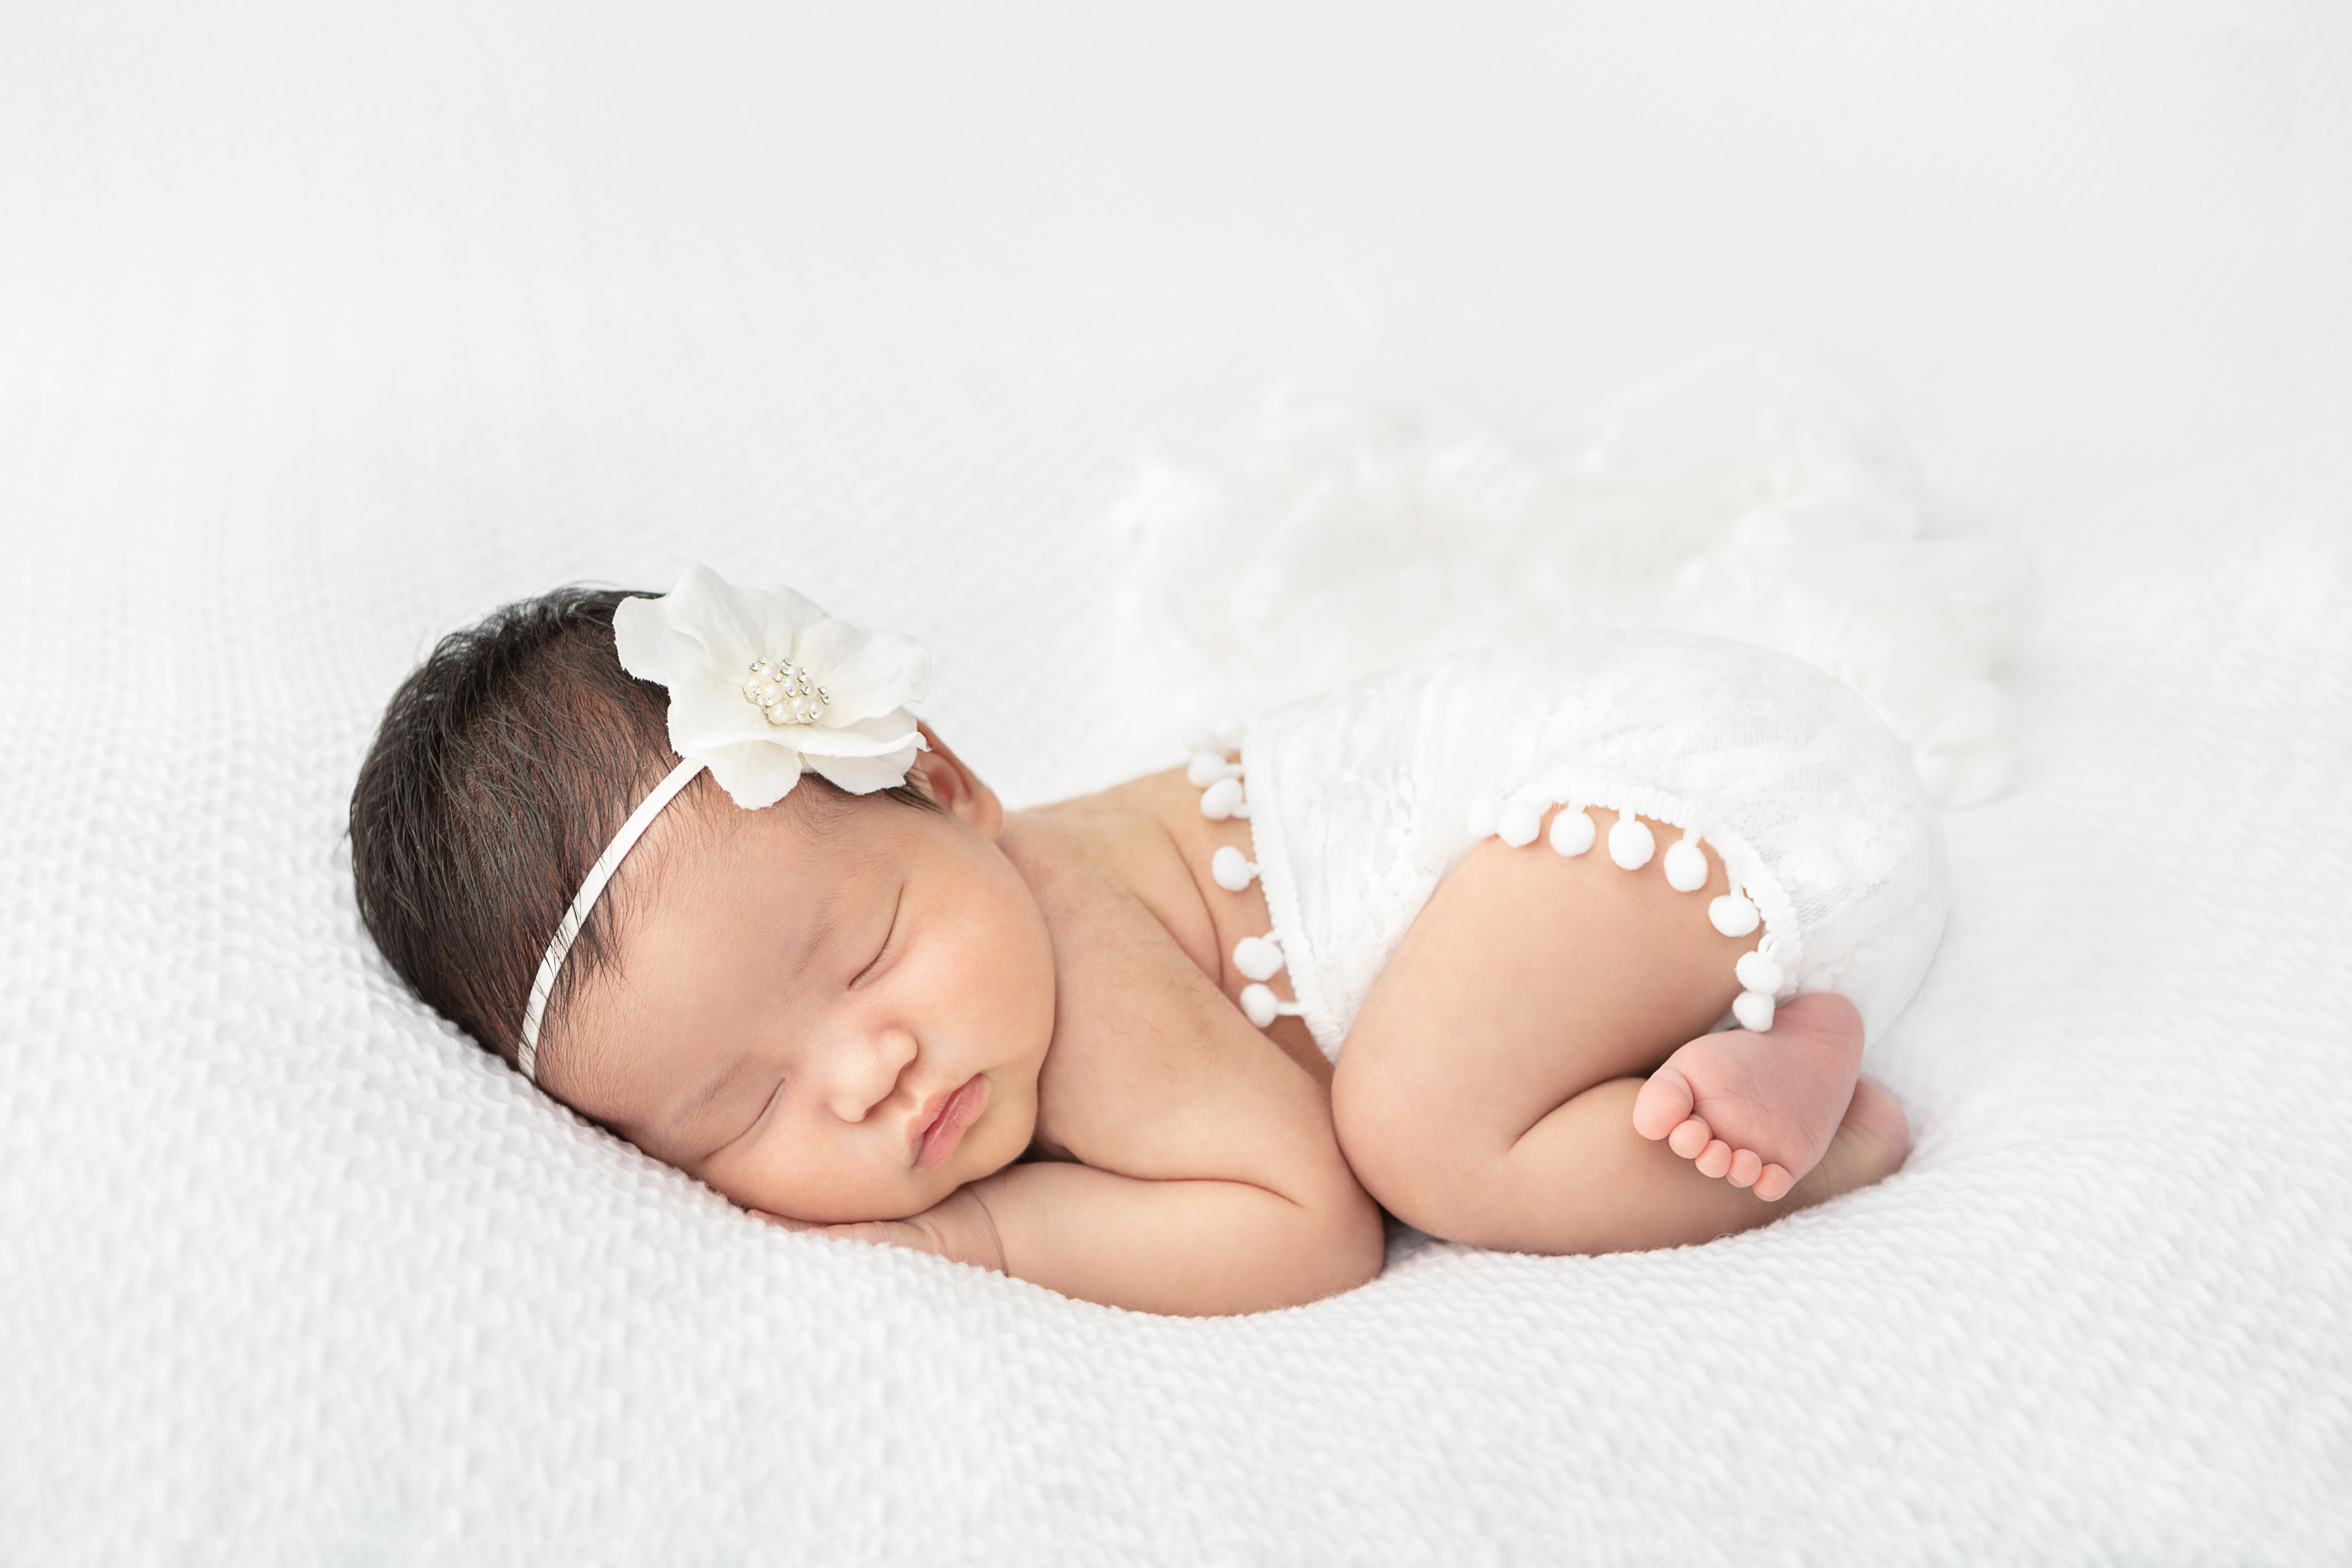 sweet newborn baby girl wrapped in a white swaddle with pom poms and lying on a white textured blanket